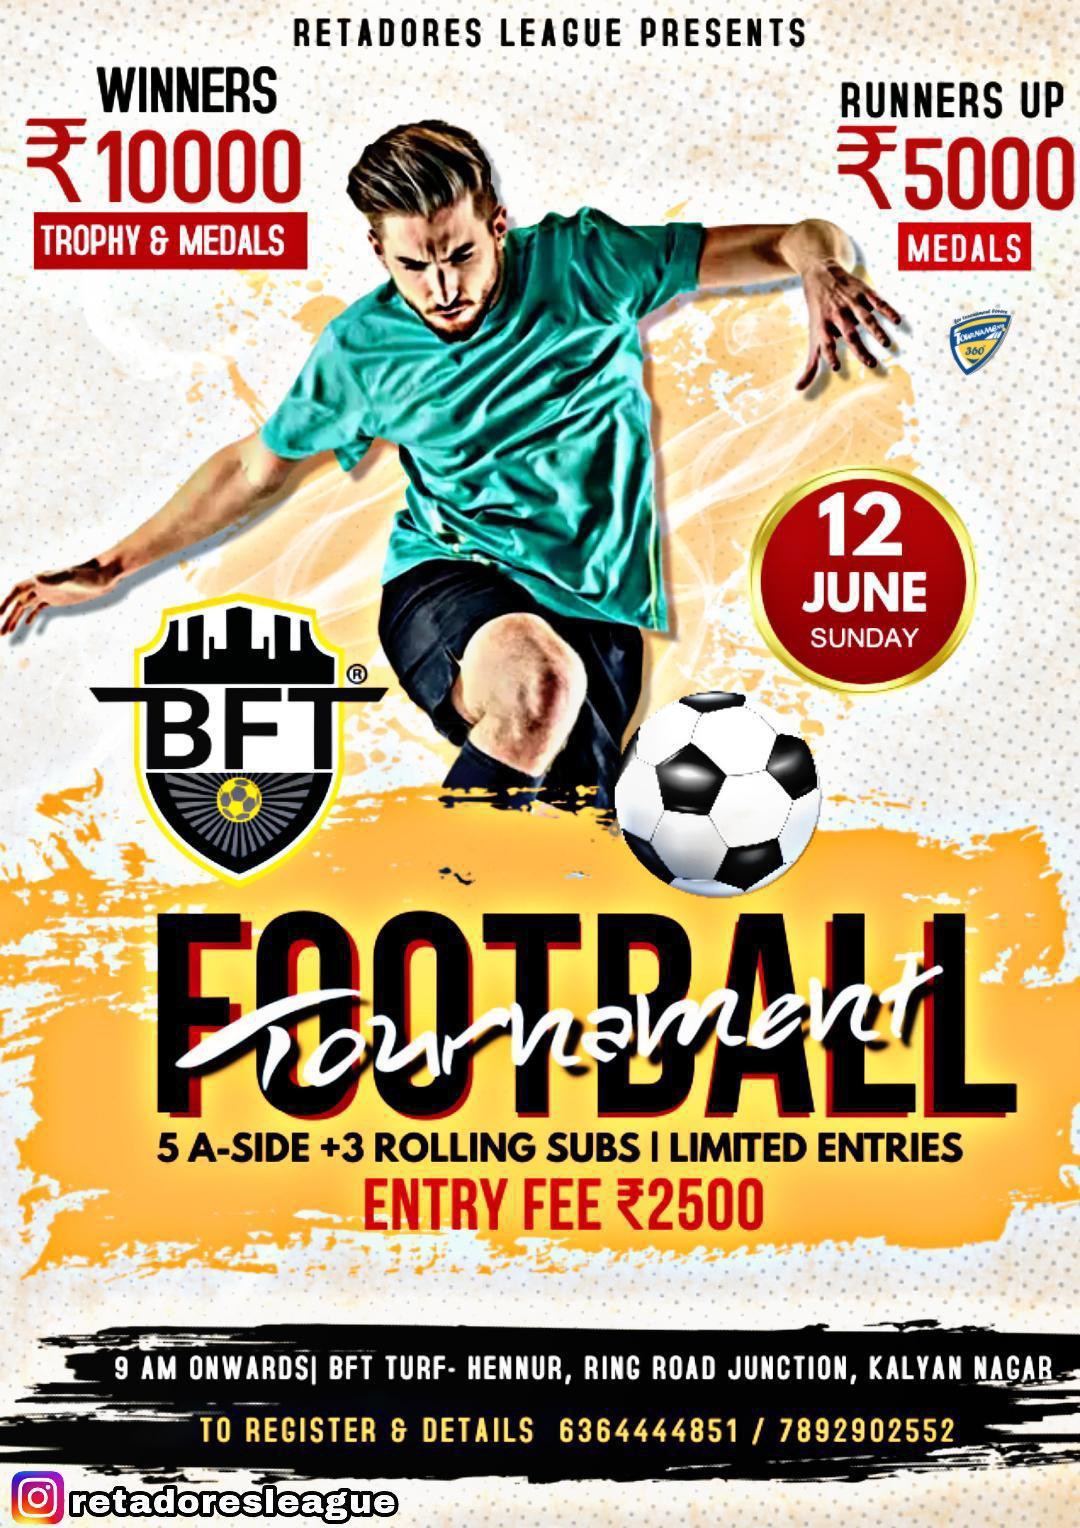 5A Side Football Tournament in Bangalore